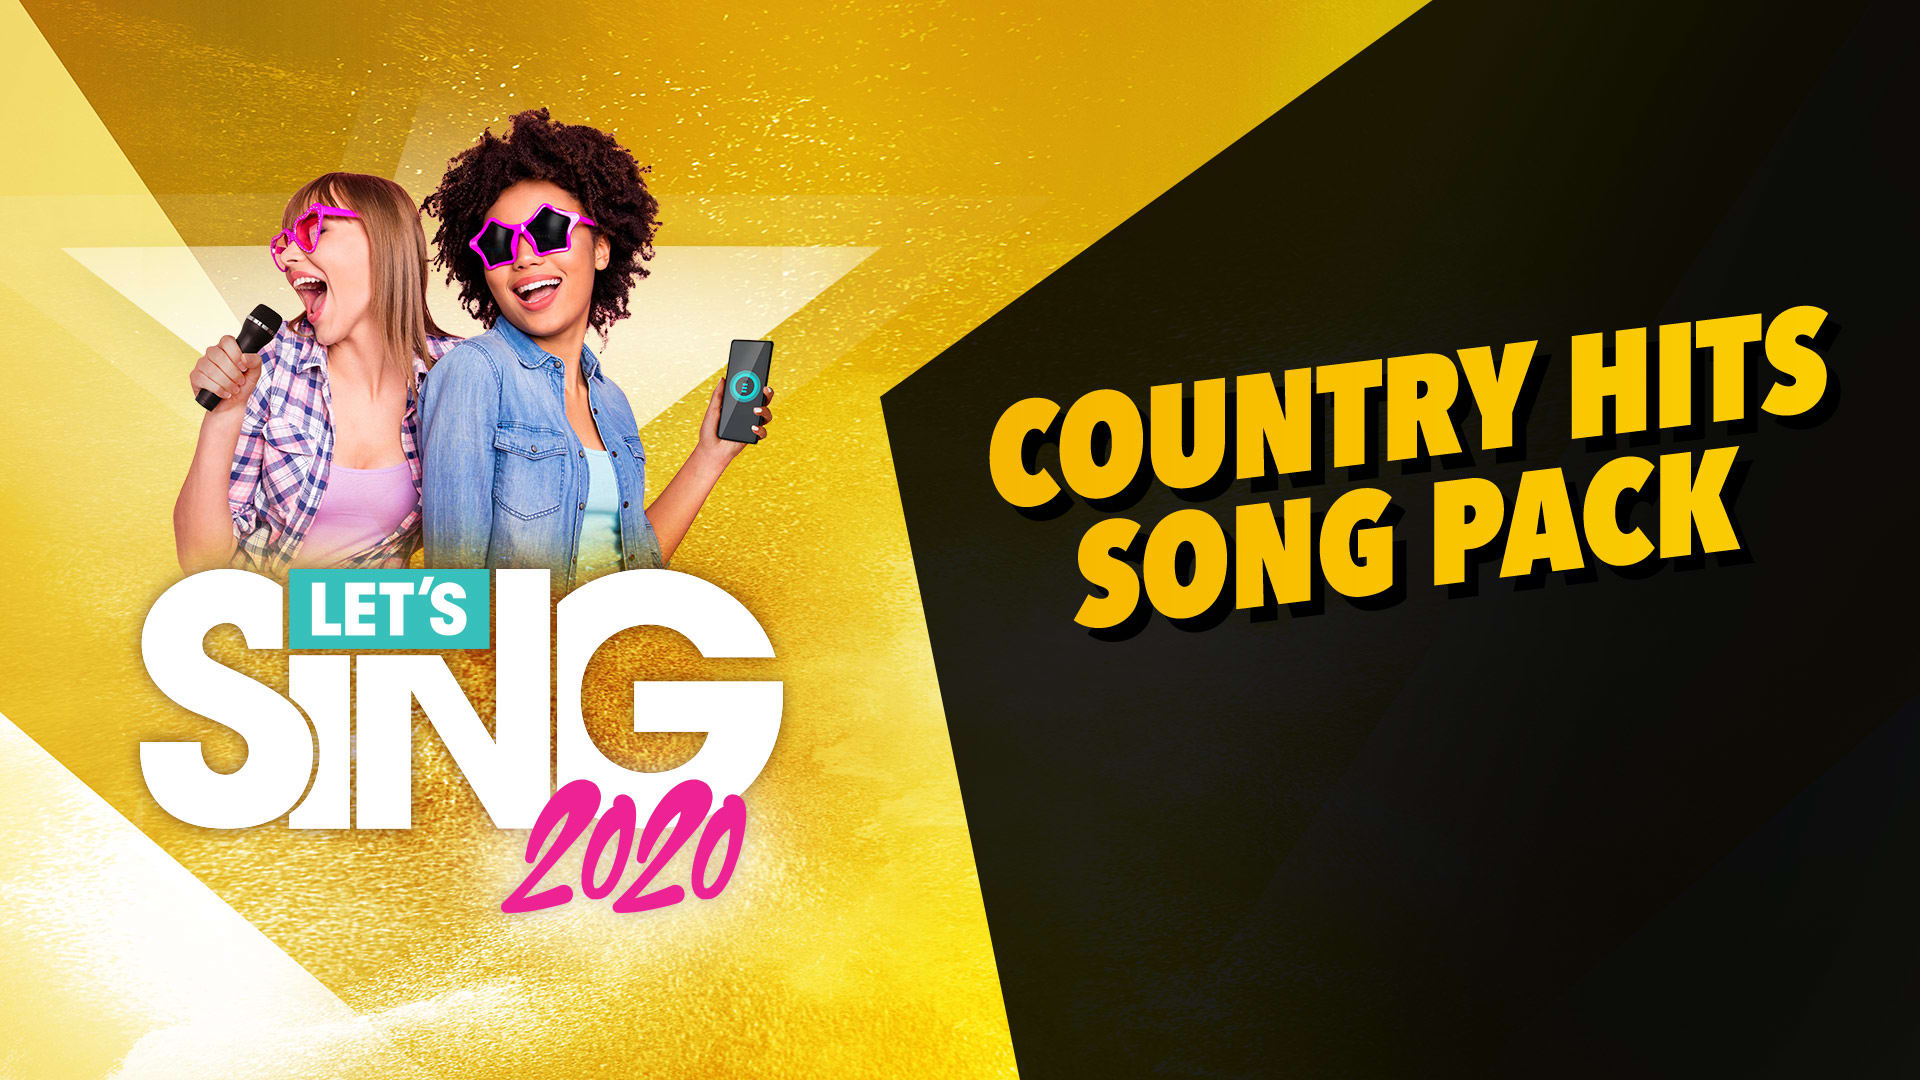 Let's Sing 2020 Country Hits Song Pack